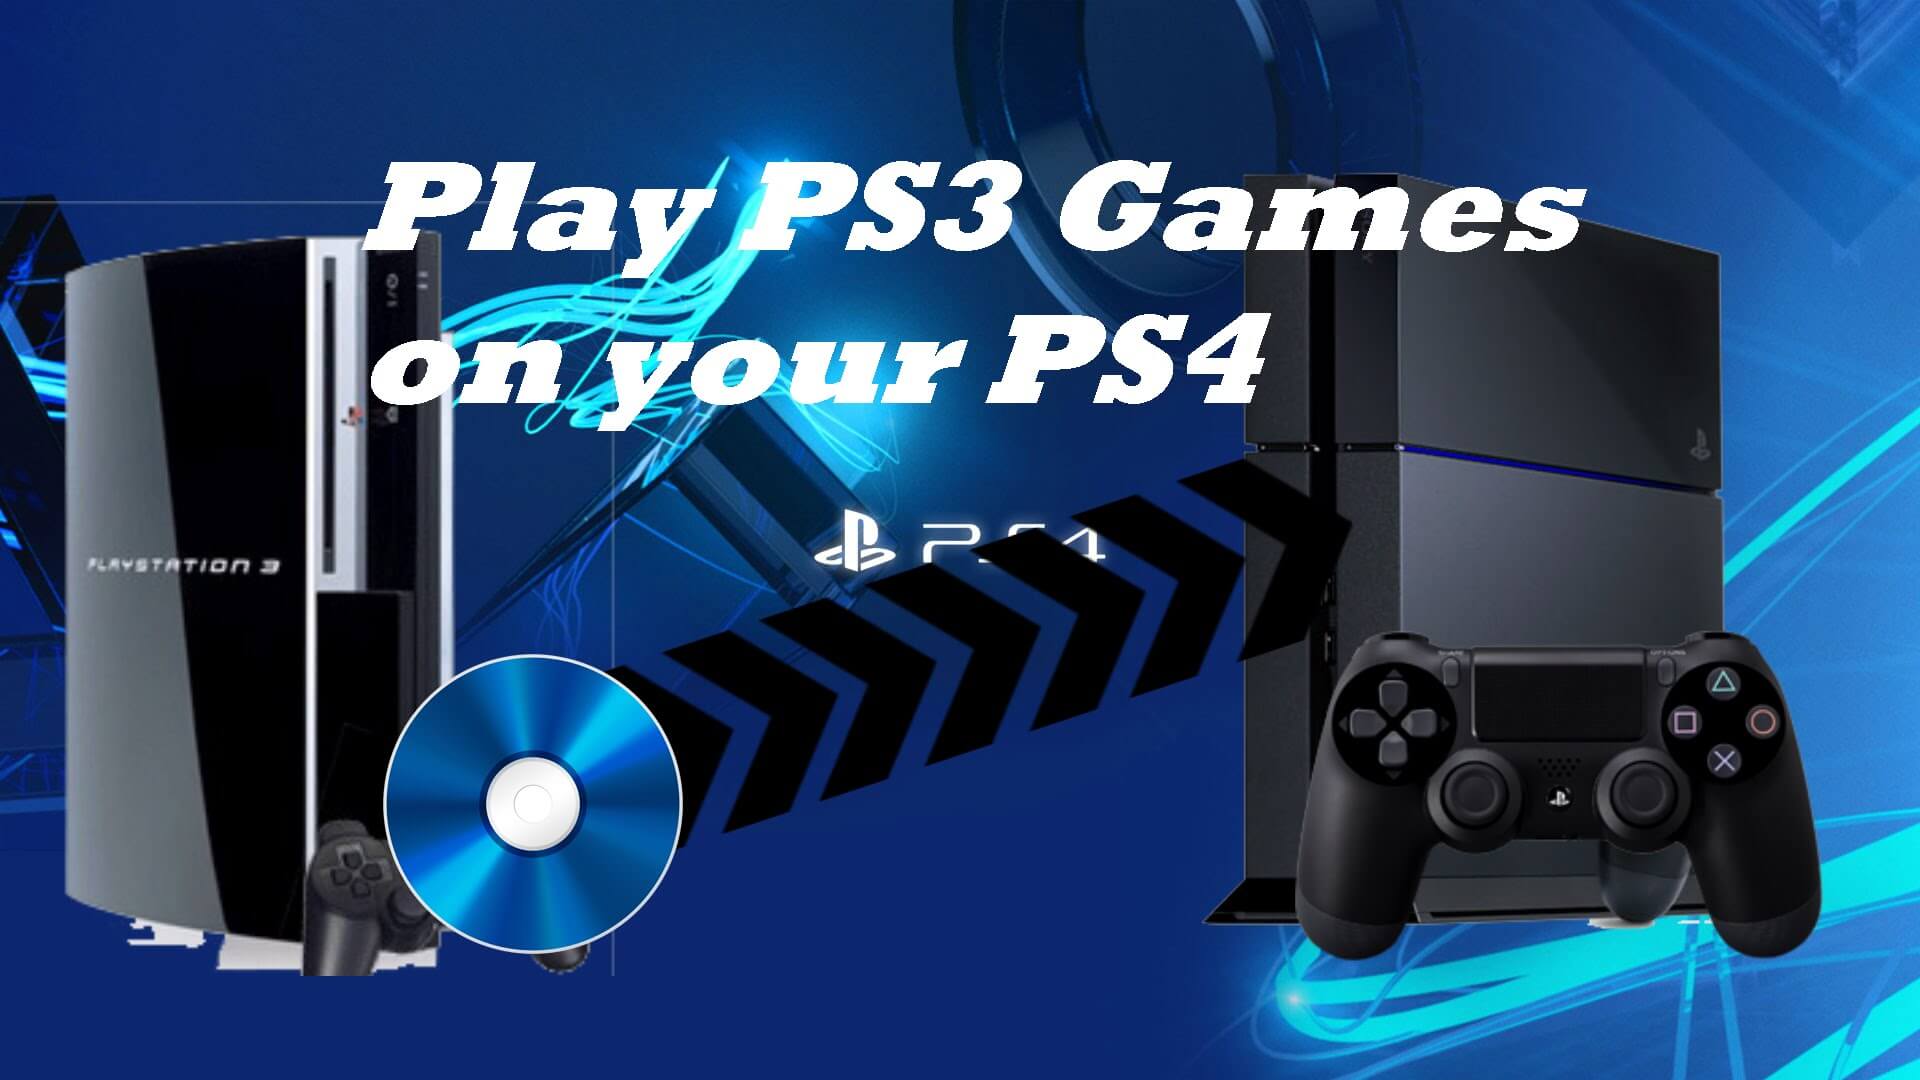 can you playstation 3 games on ps4